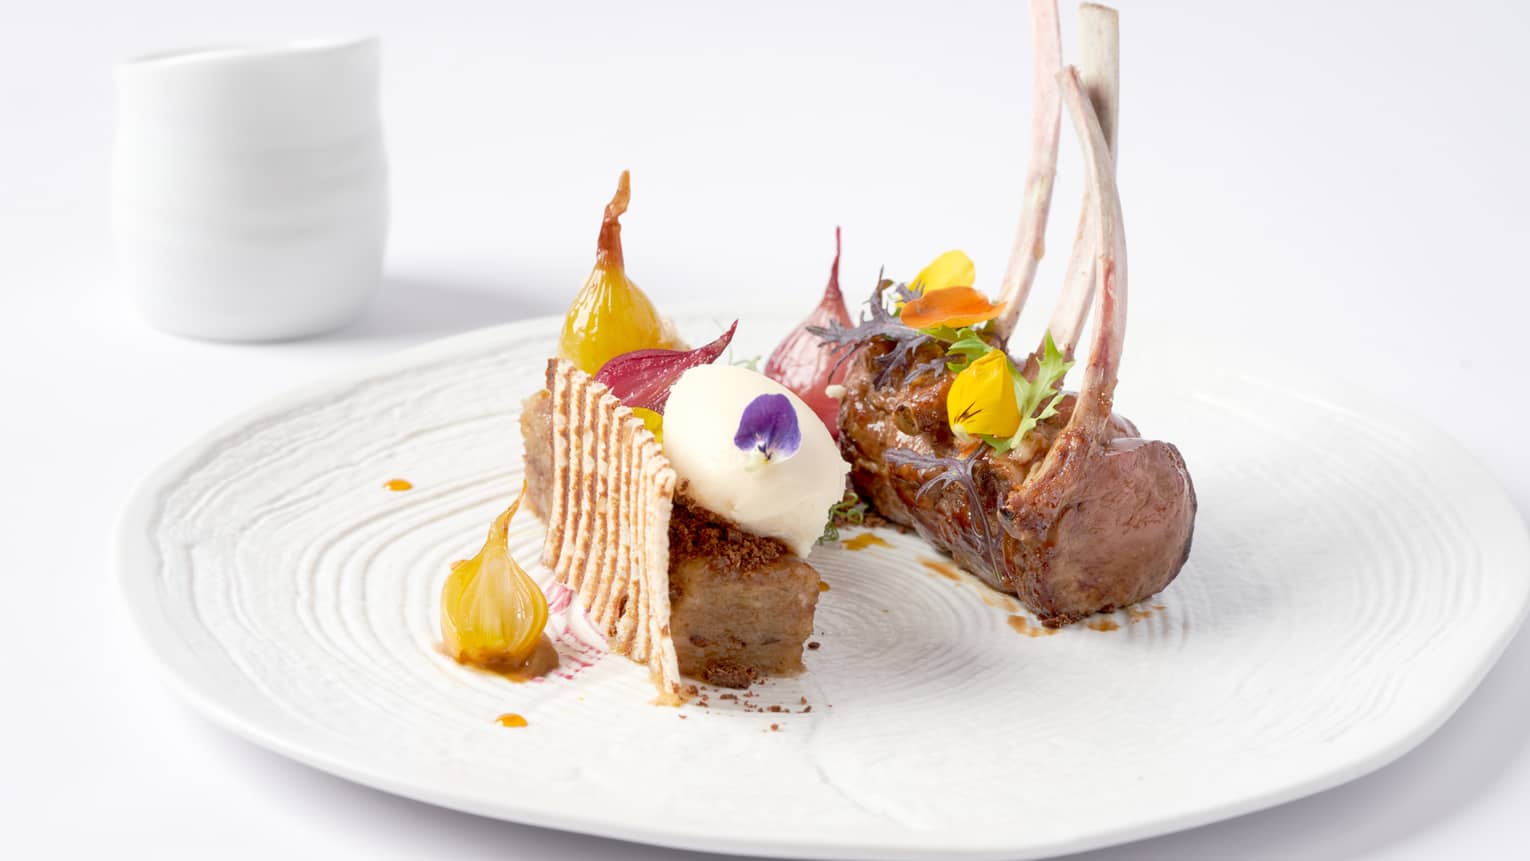 Gourmet rack of lamb topped with candied yellow beets, flowers